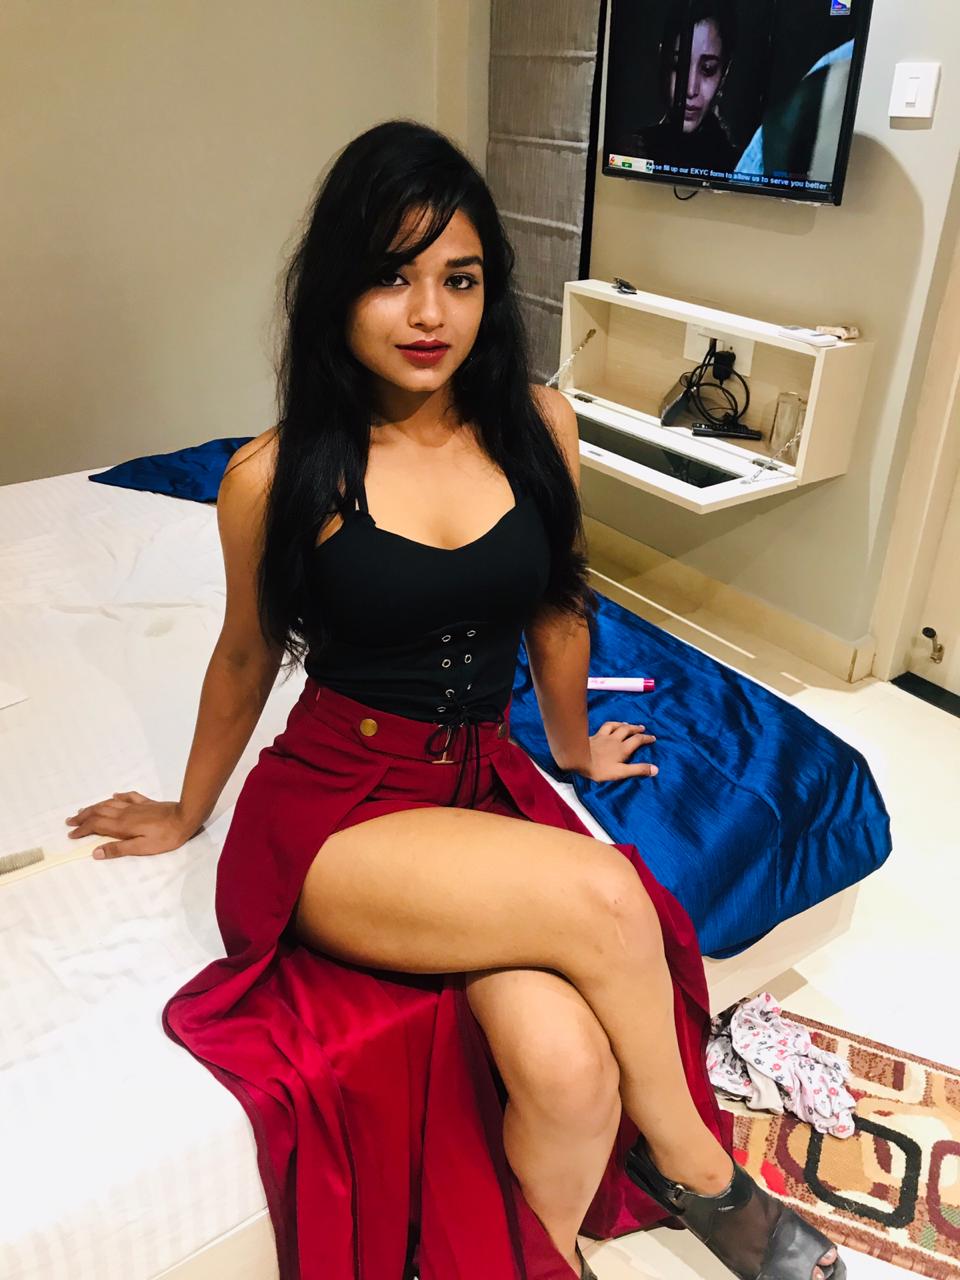 Call Girls West Bengal: Haldia call girl service available real night hotel escort service call